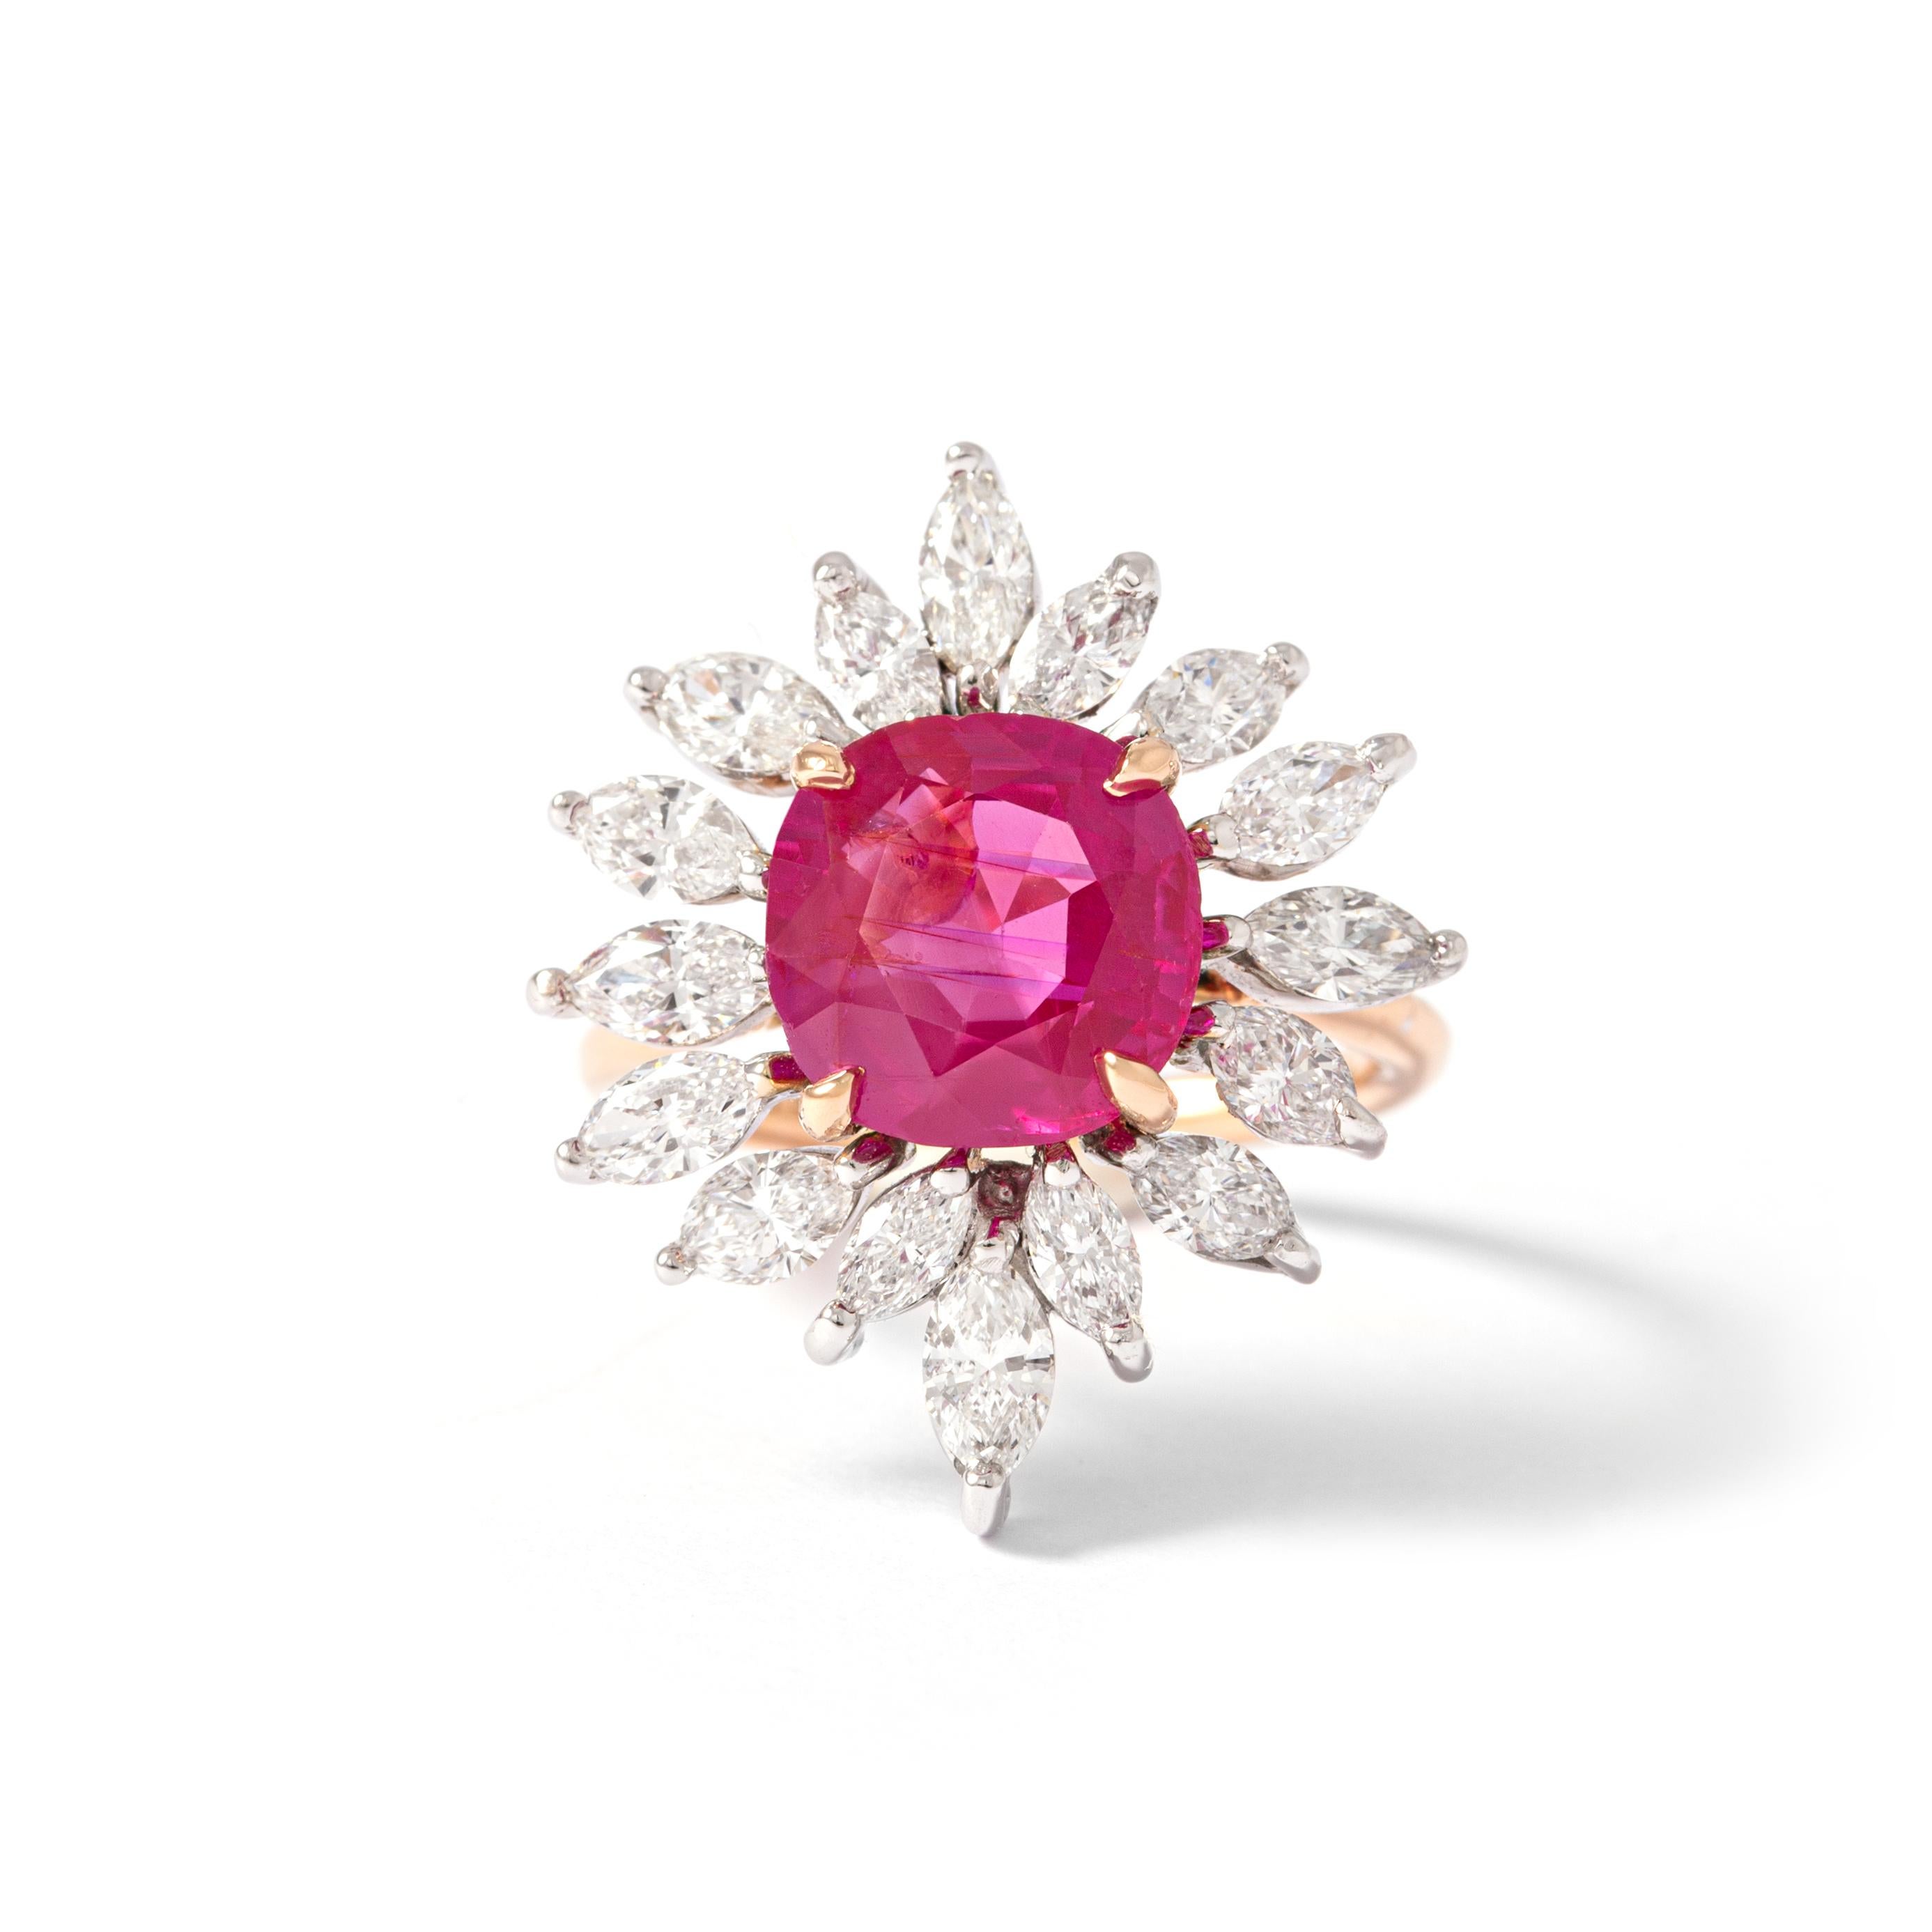 18K rose and white gold ring set with marquise-cut diamonds, centered with a cushion-cut ruby weighing 3.735 carats, natural, Burmese, unheated, per SSEF certificate: 90830.
5.48g gross weight.